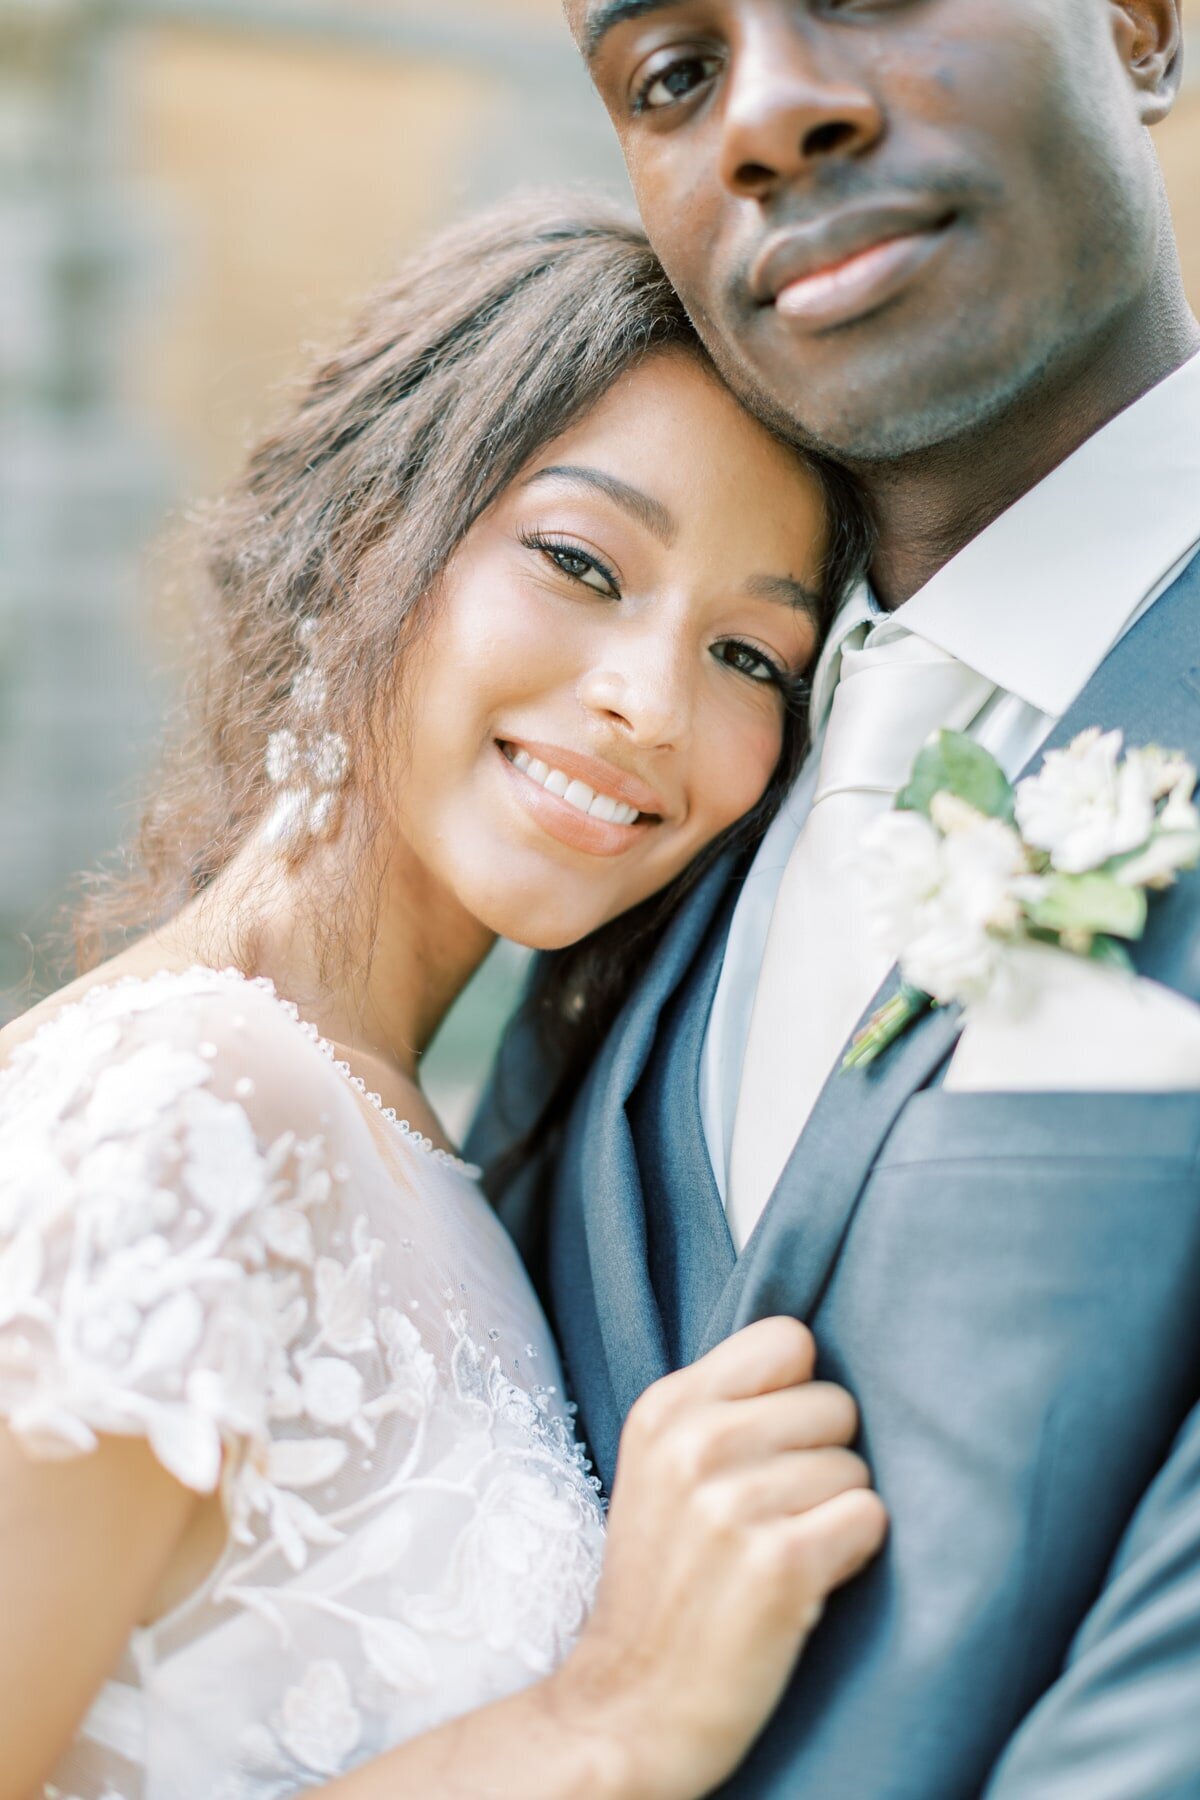 Stunning portrait of a bride and groom snuggled together outside of the Clifton Inn wedding venue.